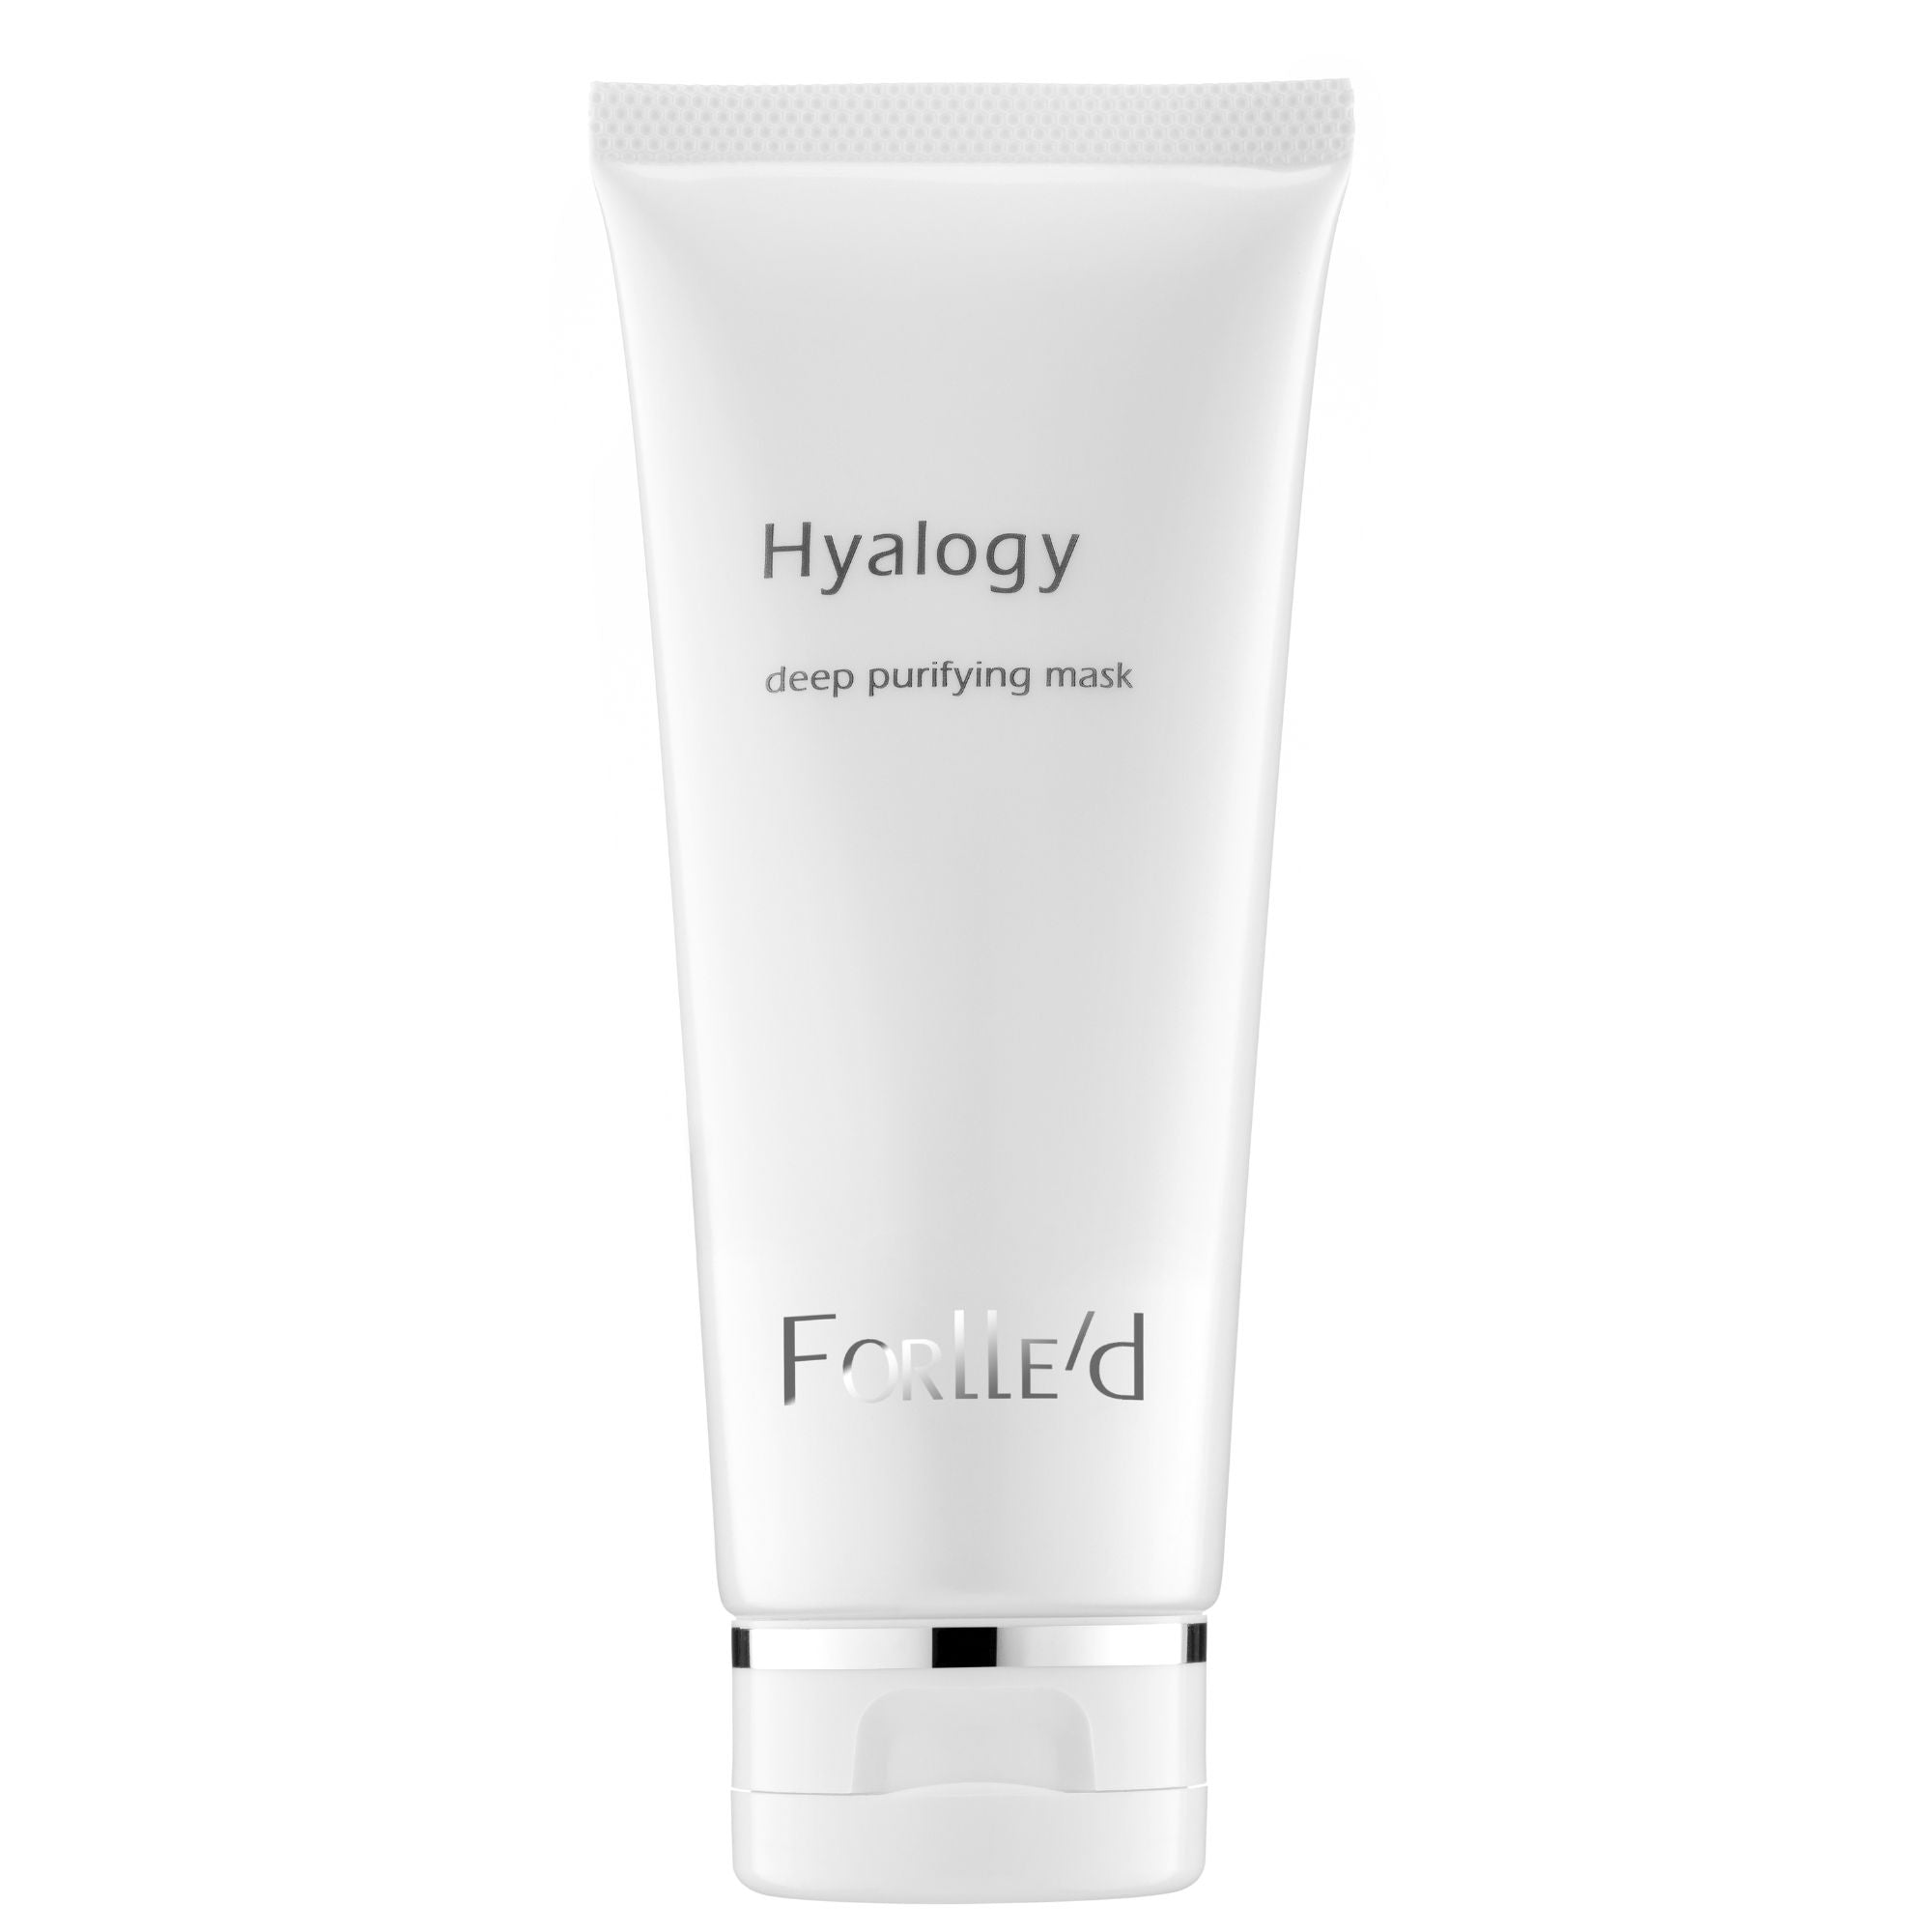 Forlle'd Hyalogy deep purifying mask (100ml)